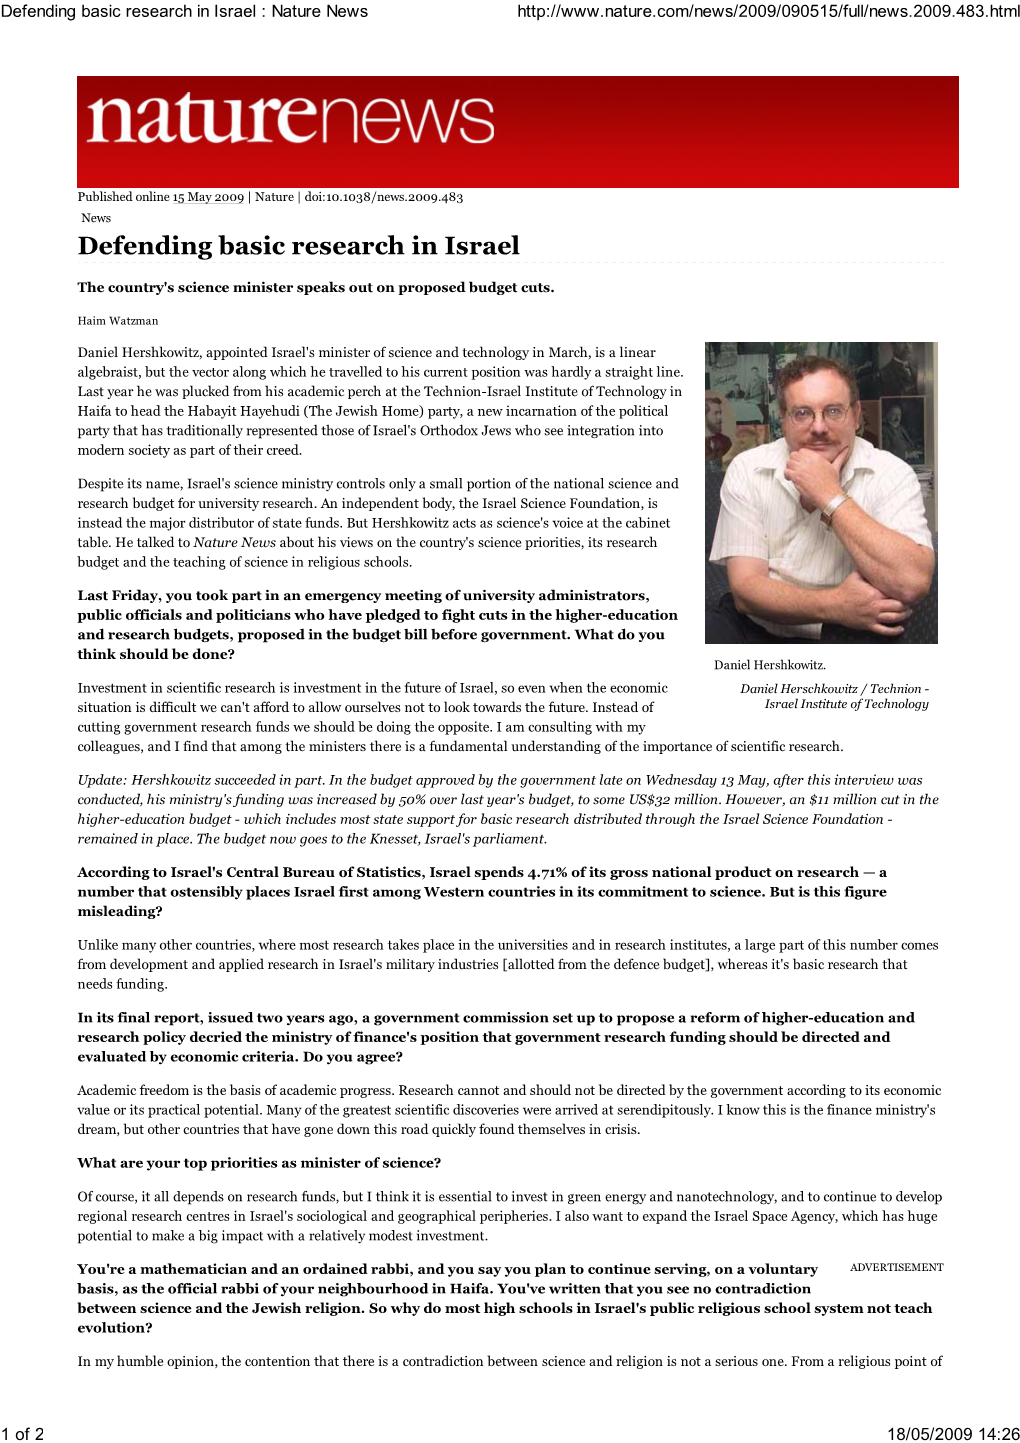 Defending Basic Research In